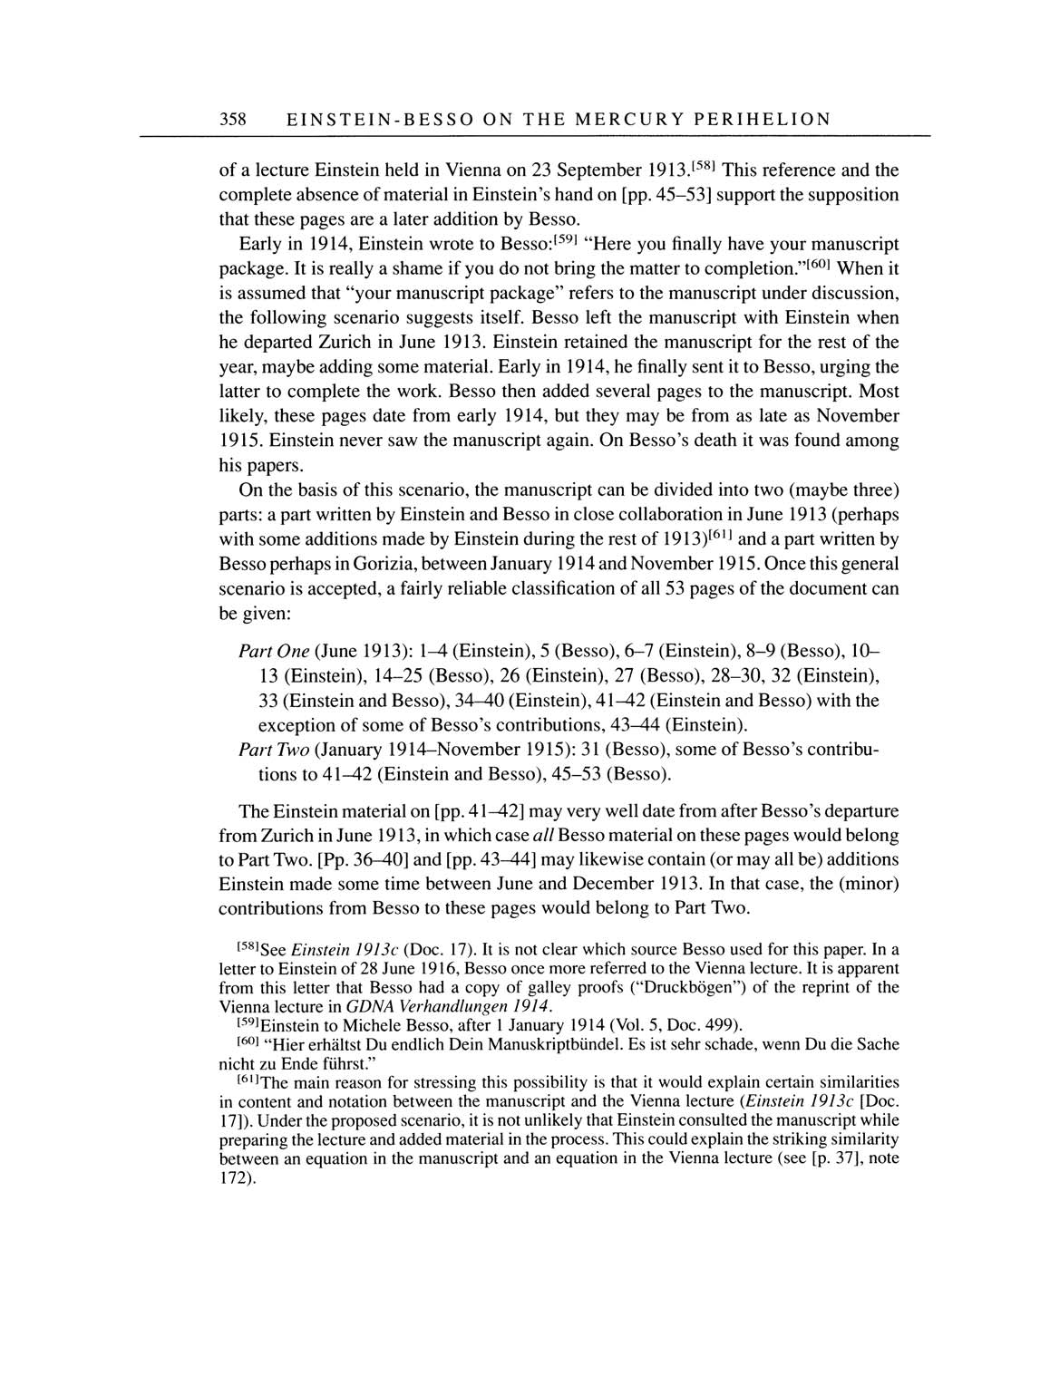 Volume 4: The Swiss Years: Writings 1912-1914 page 358